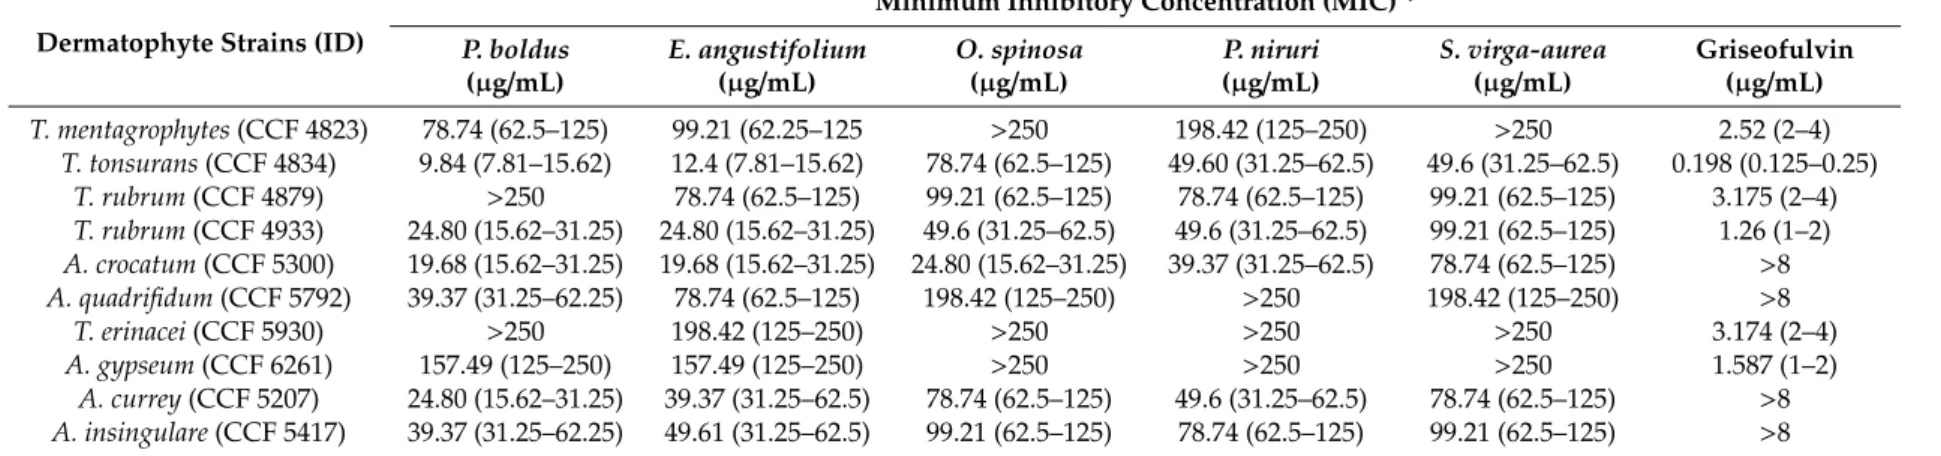 Table 2. Minimal inhibitory concentrations (MICs) of plant extracts against dermatophytes strains.